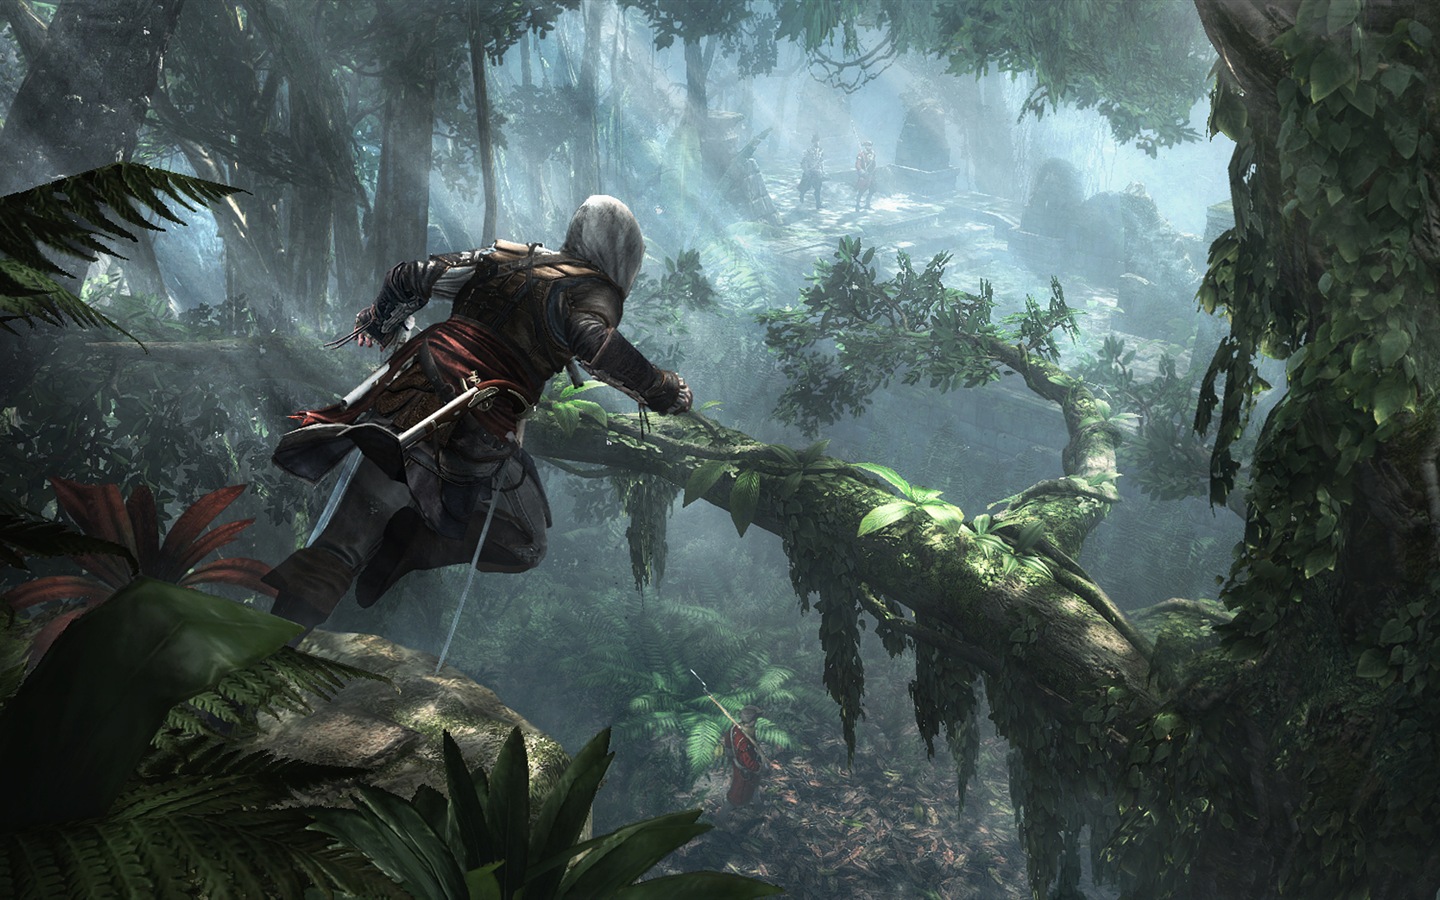 Creed IV Assassin: Black Flag HD wallpapers #15 - 1440x900